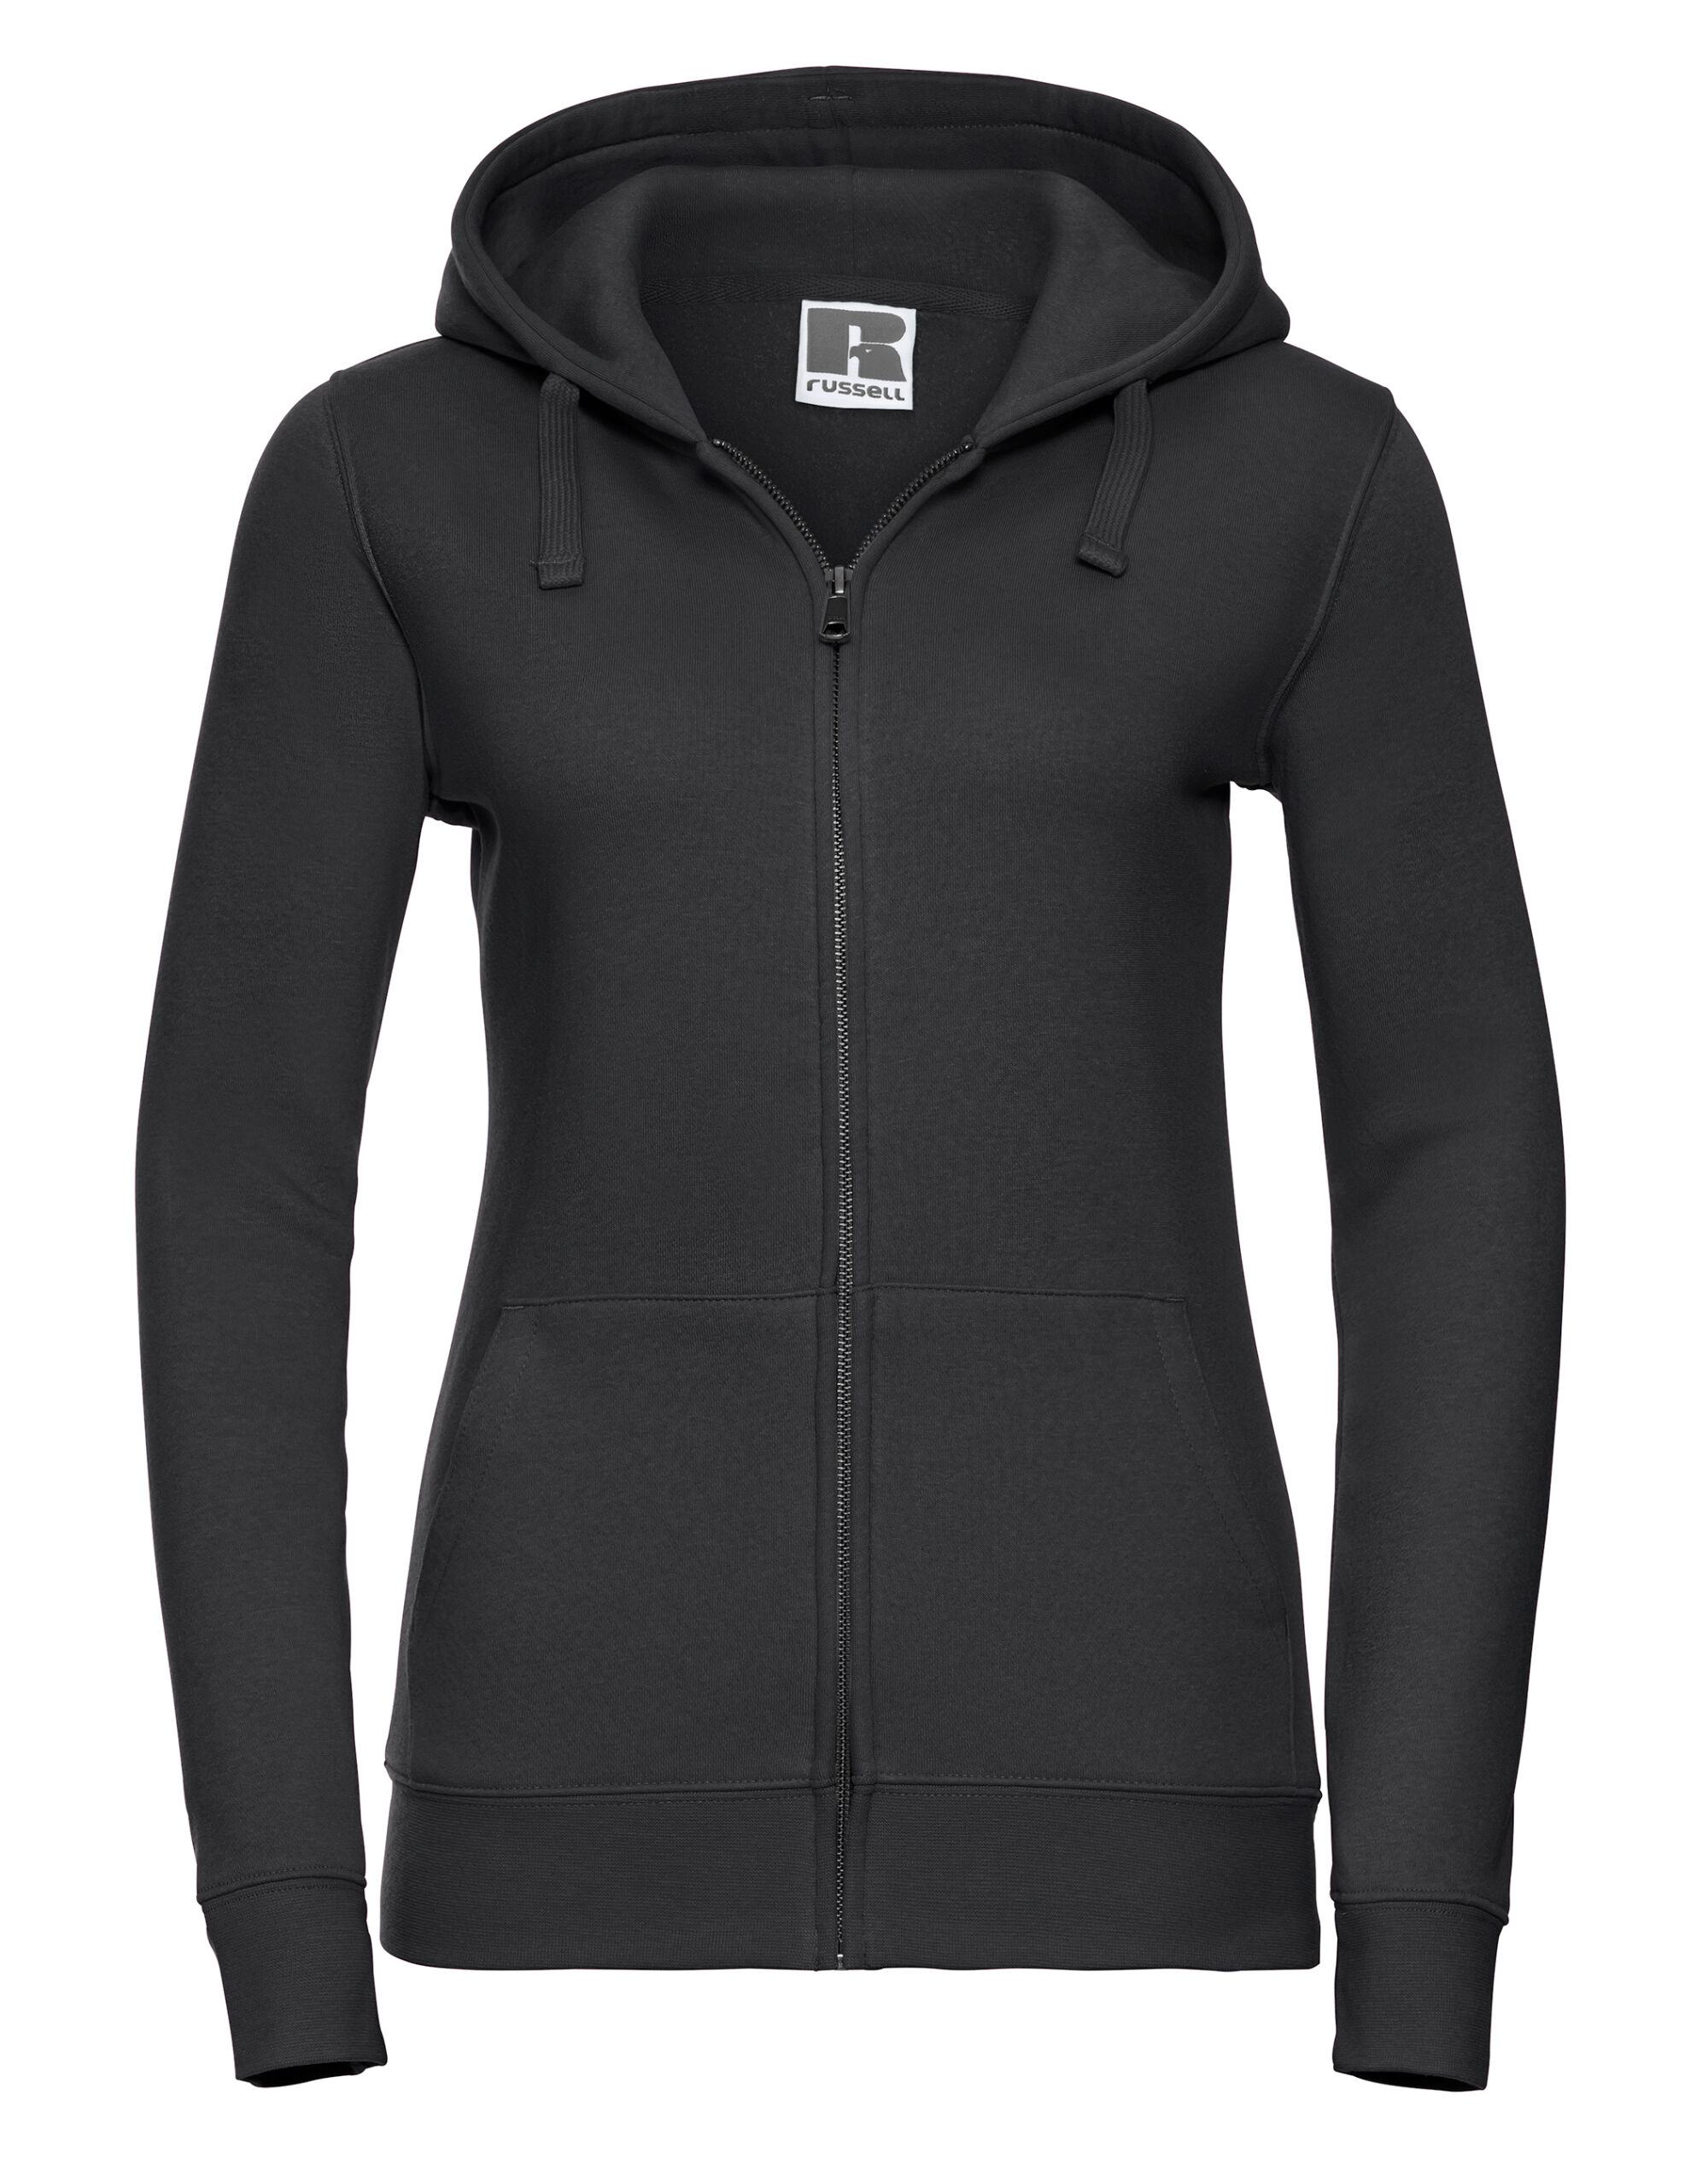 Russell Womens Authentic Zipped Hood 280g